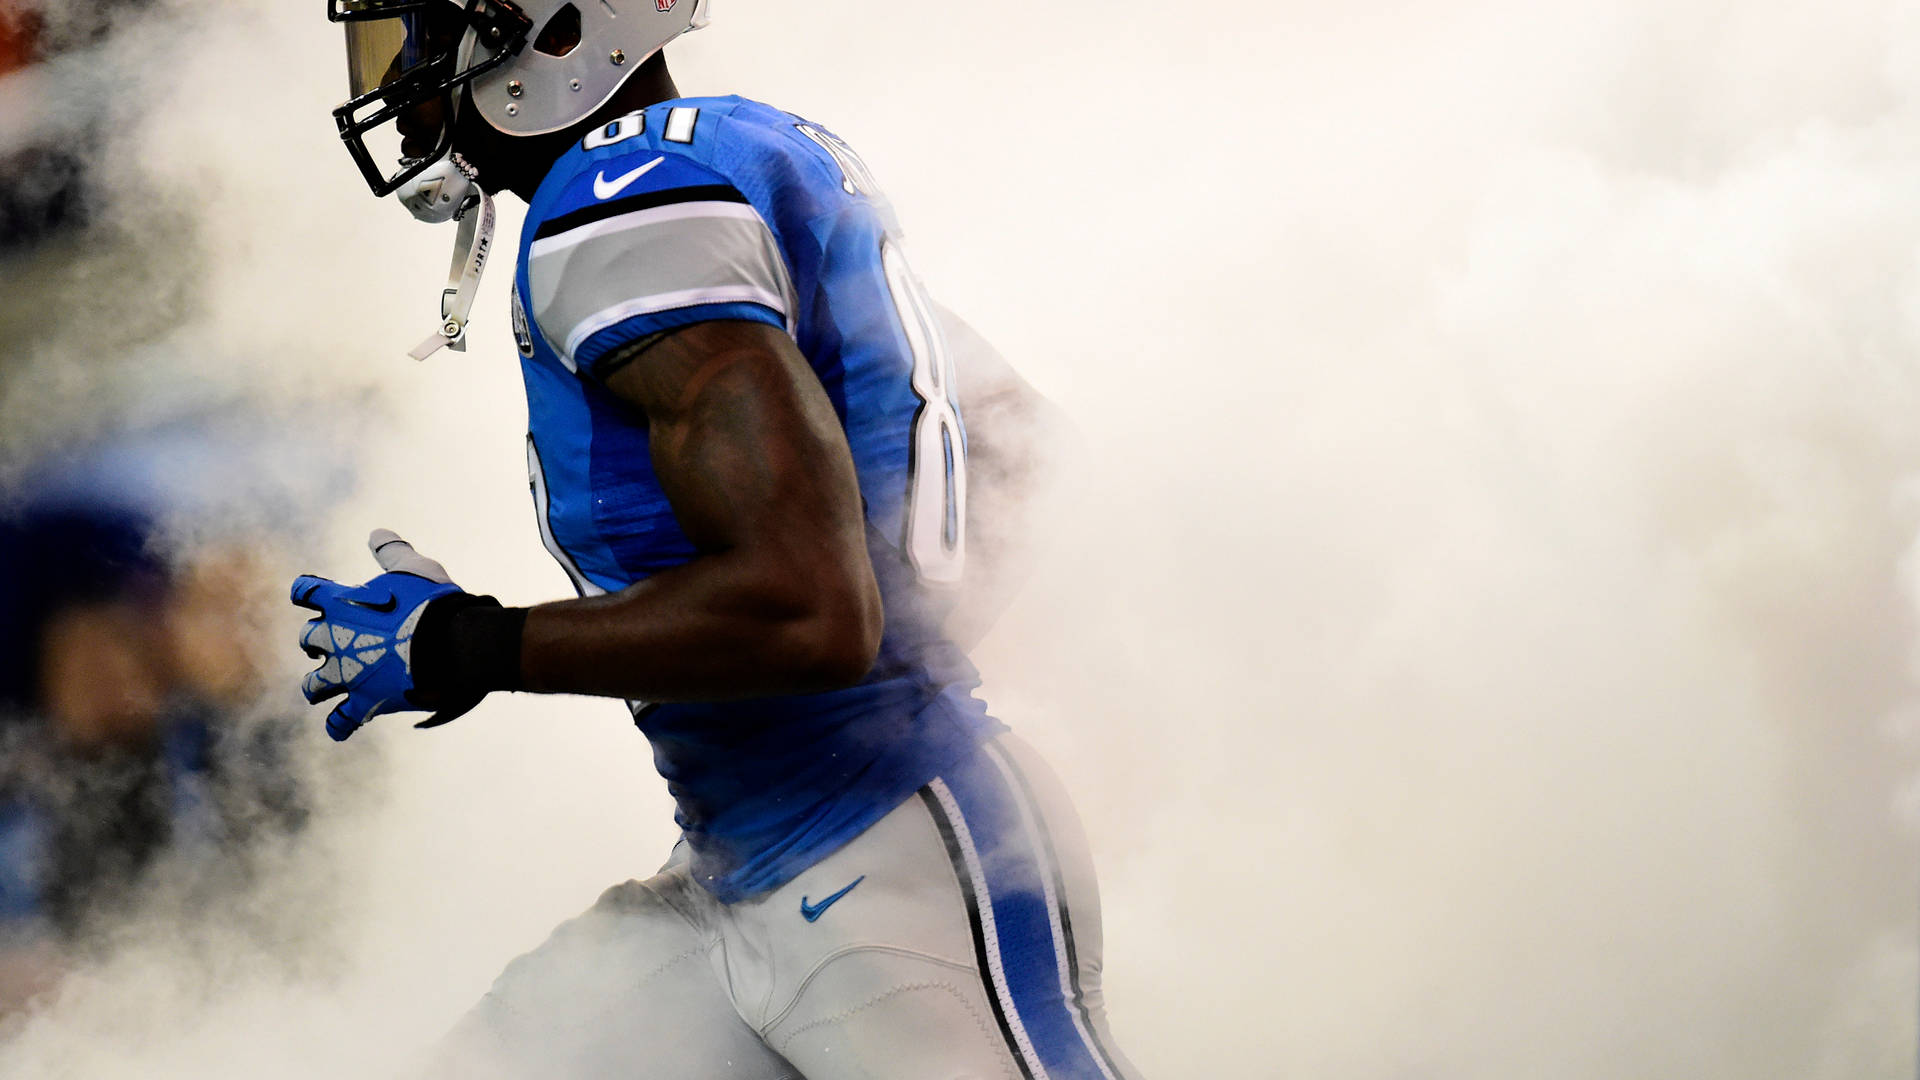 Detroit Lions Player In Smokes Wallpaper